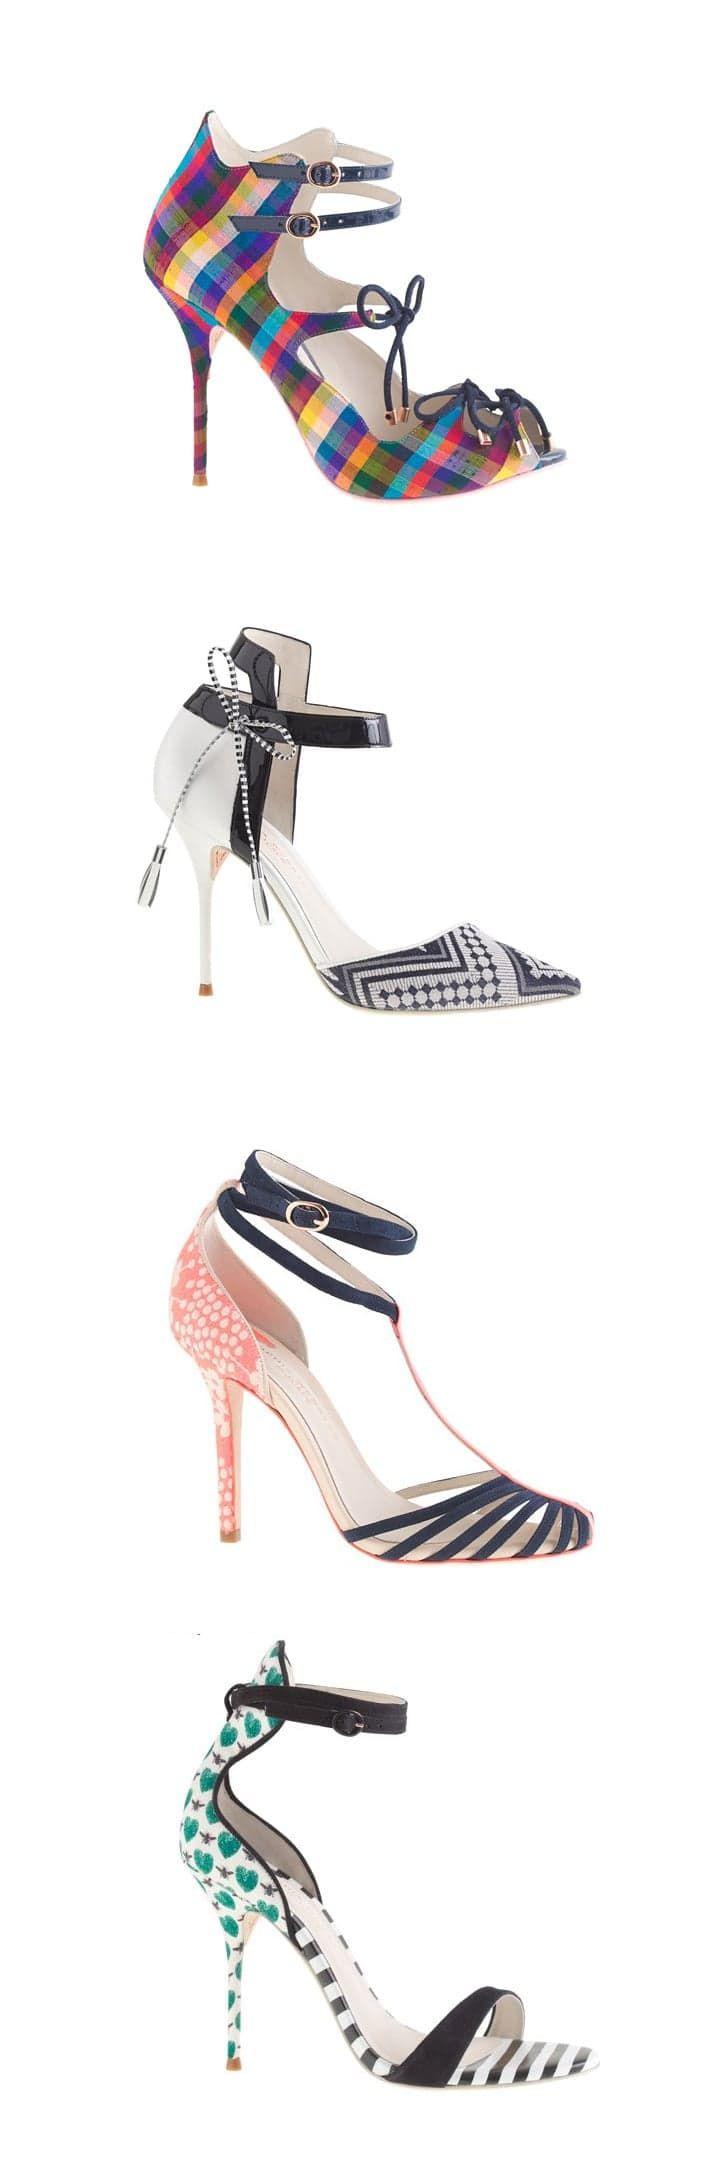 Wedding - Bet You Can't Pick Just 1 Shoe In This J.Crew Collection